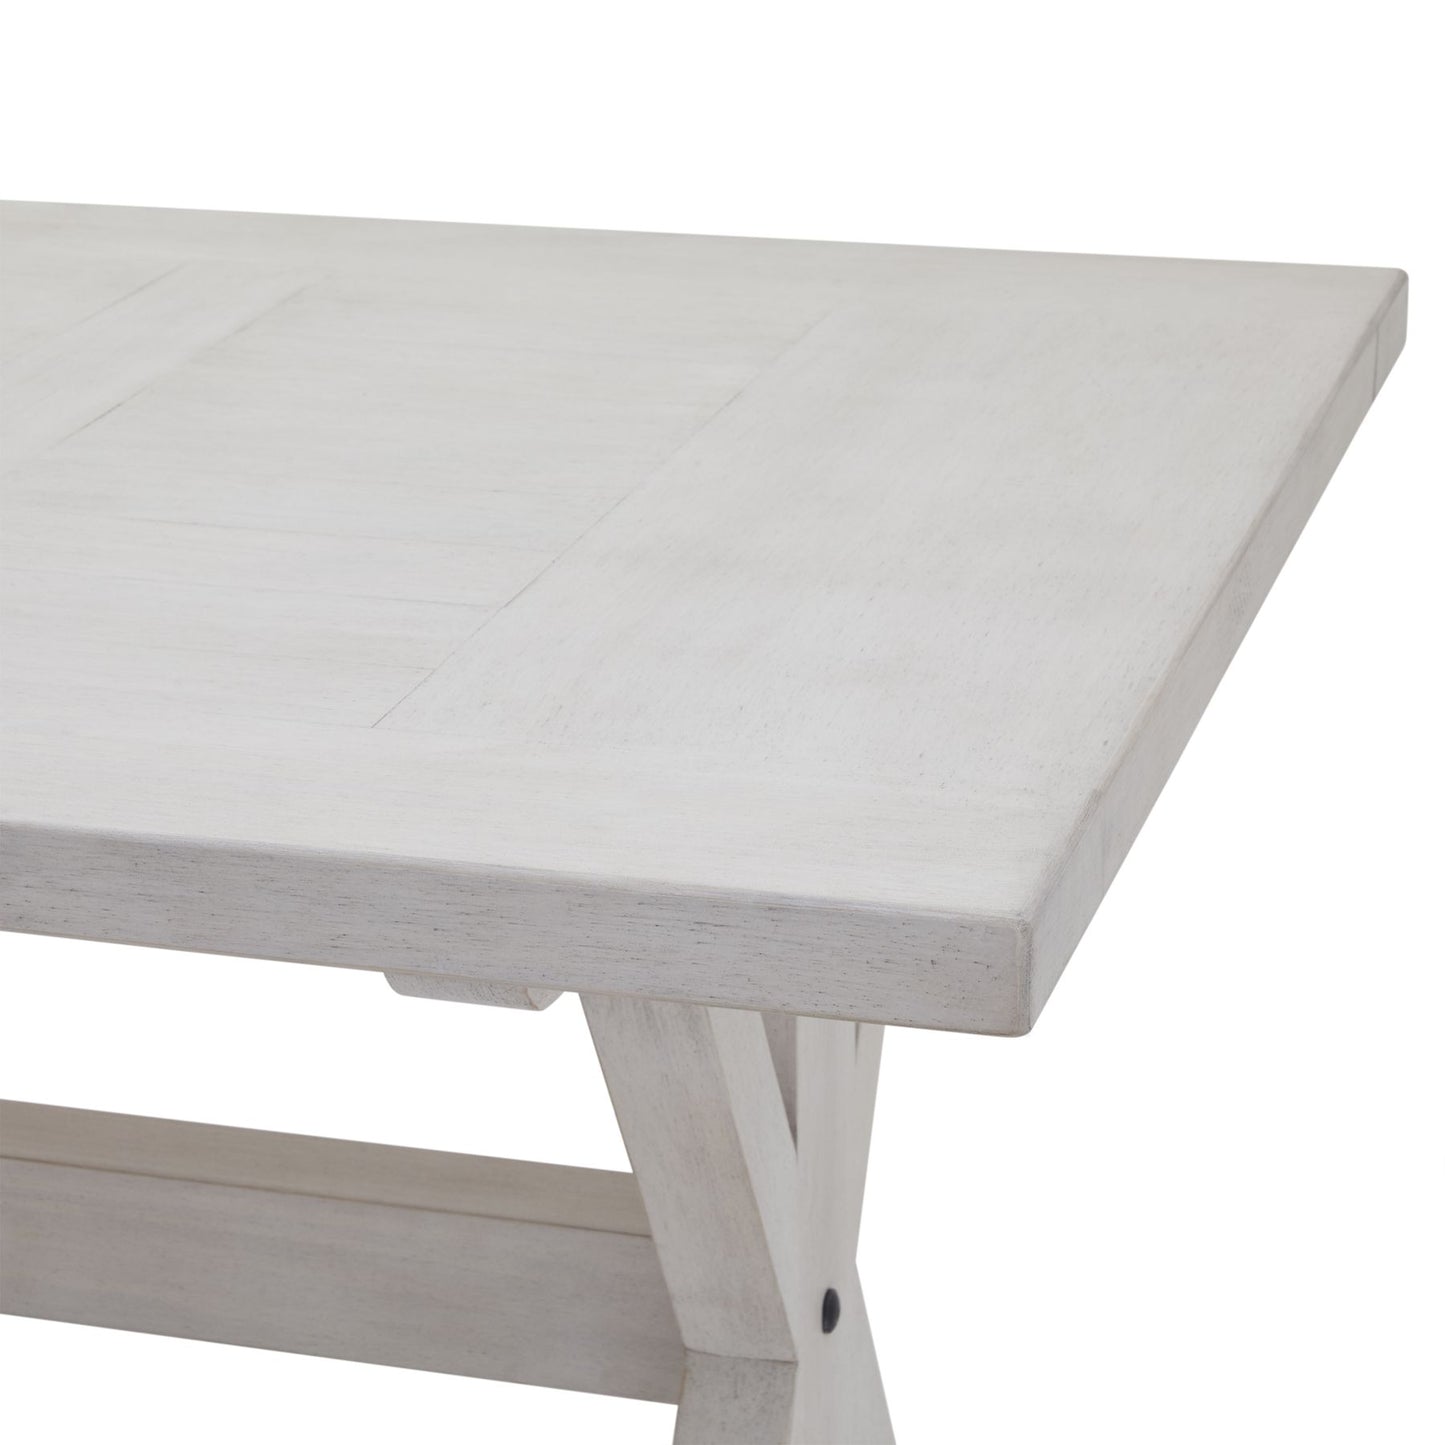 White wash dining table